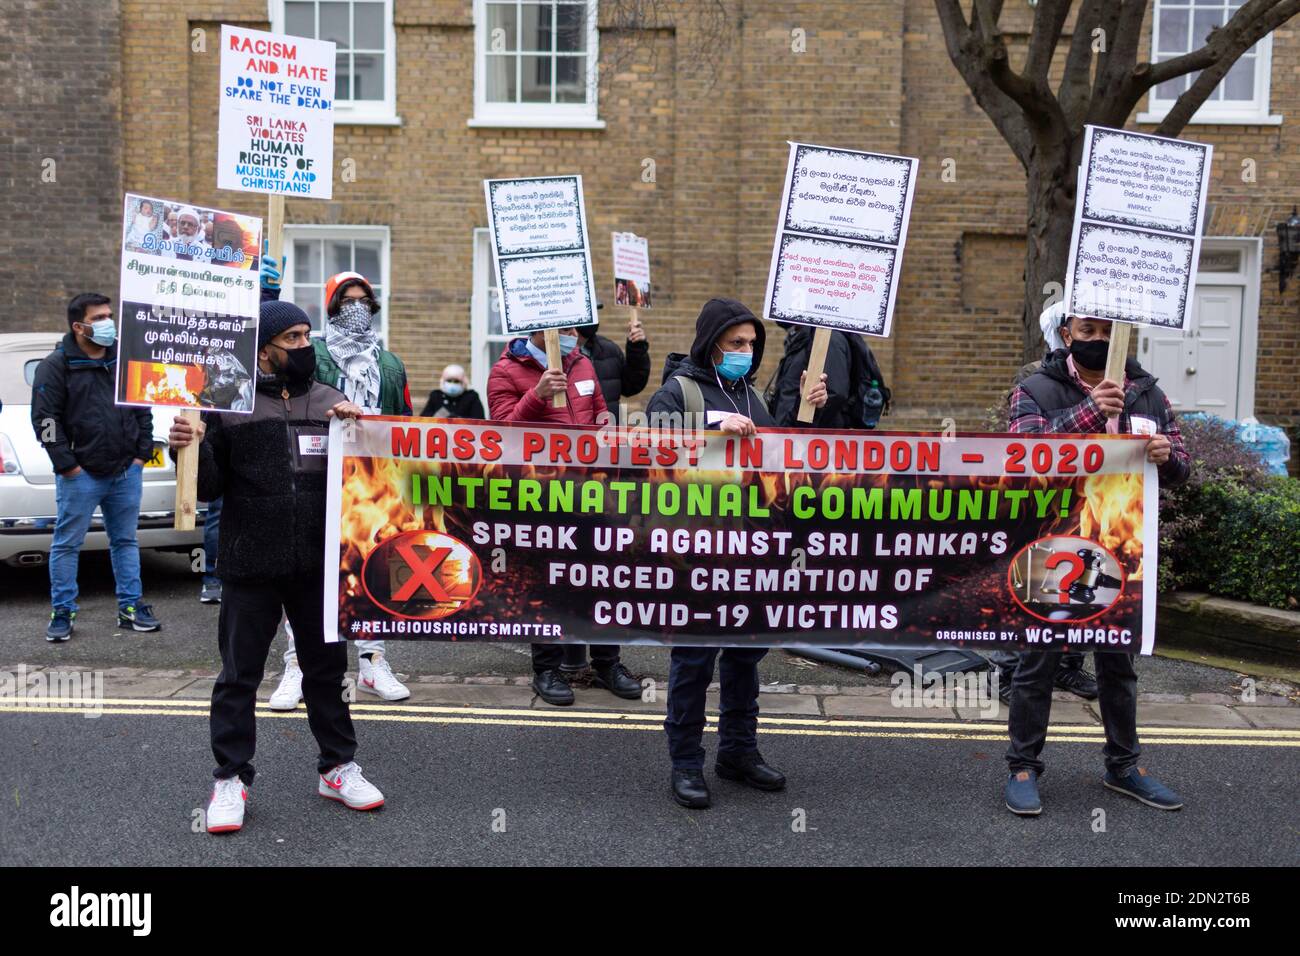 Protesters with placards during protest against forced cremation of COVID-19 victims in Sri Lanka, Embassy of Sri Lanka, London, 12 December 2020 Stock Photo